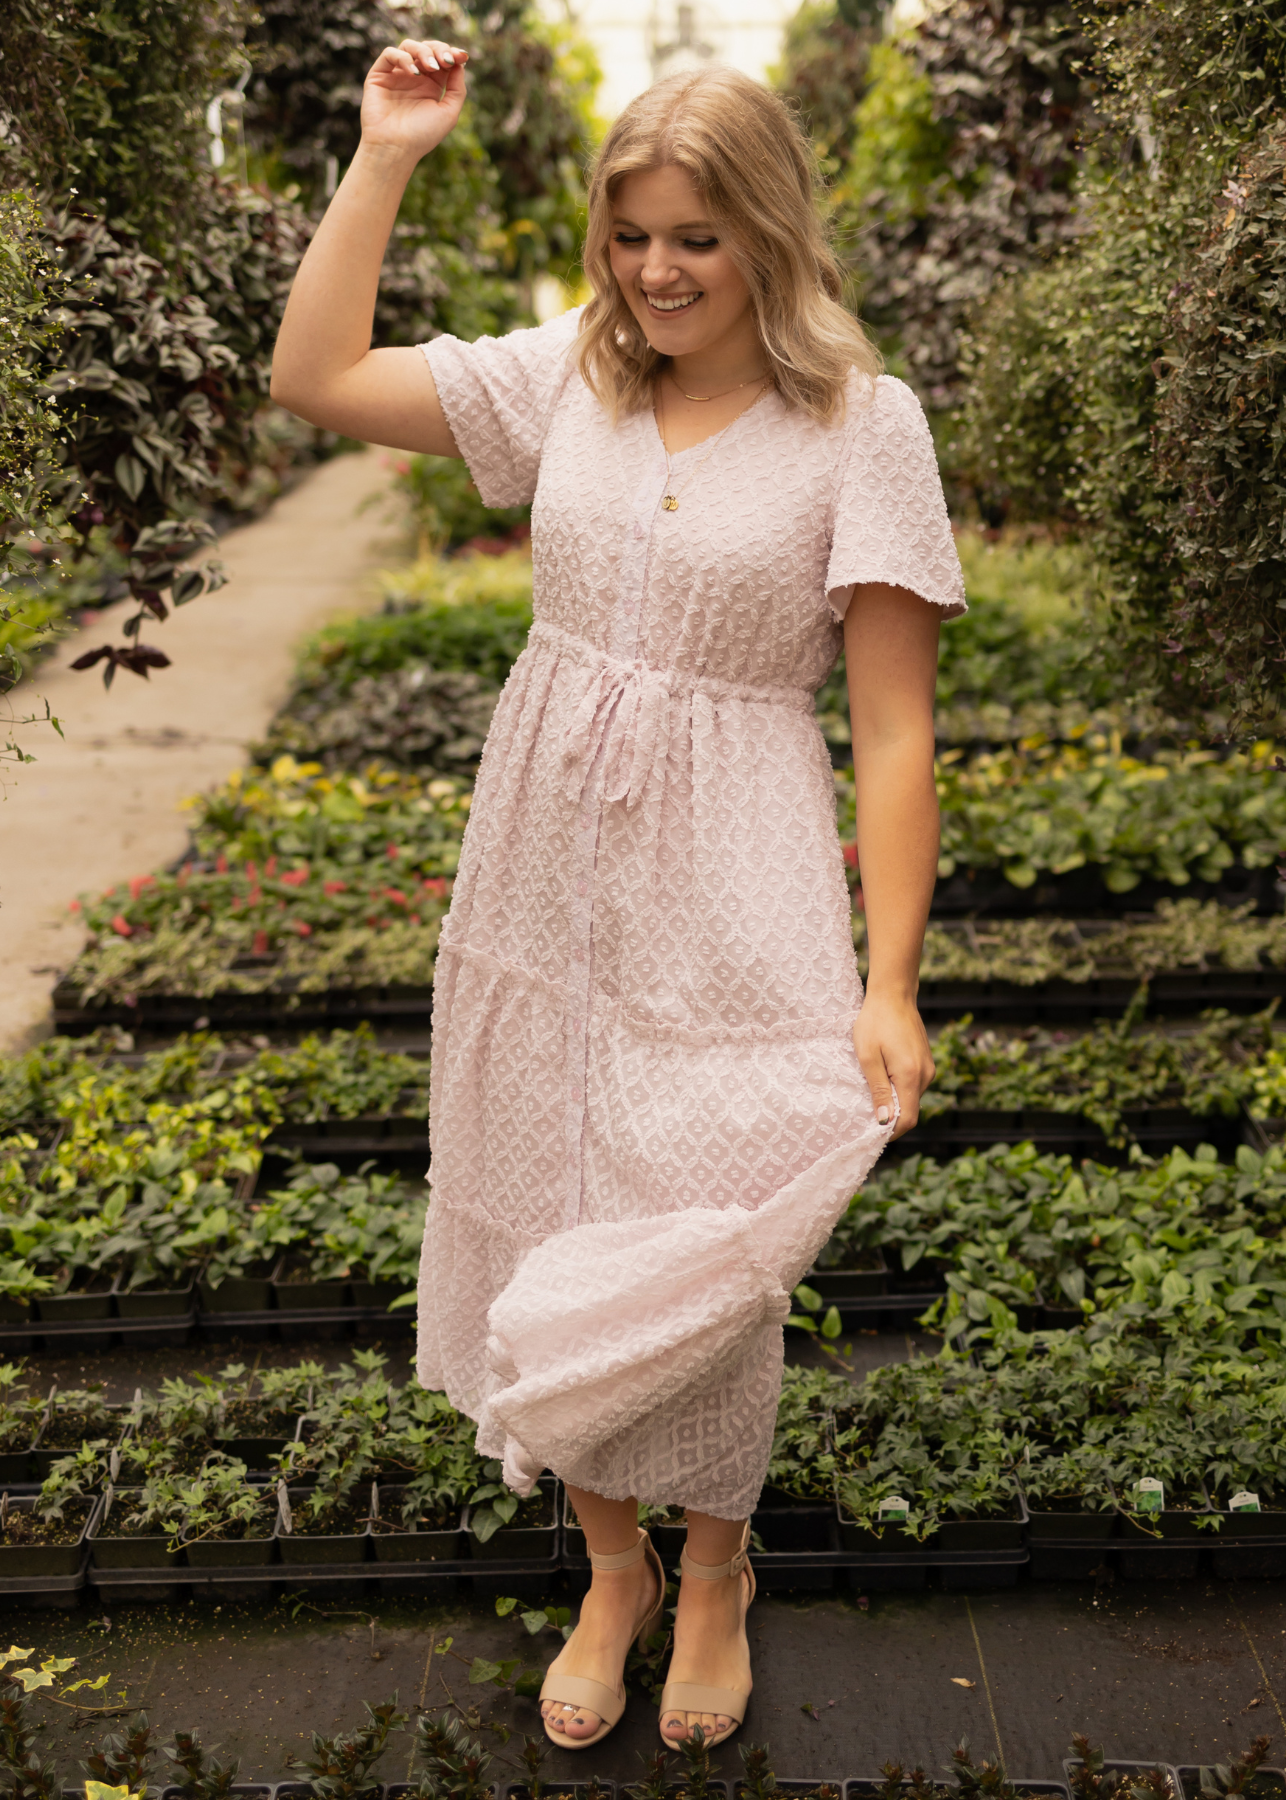 Short sleeve dusty pink dress with a v-neck